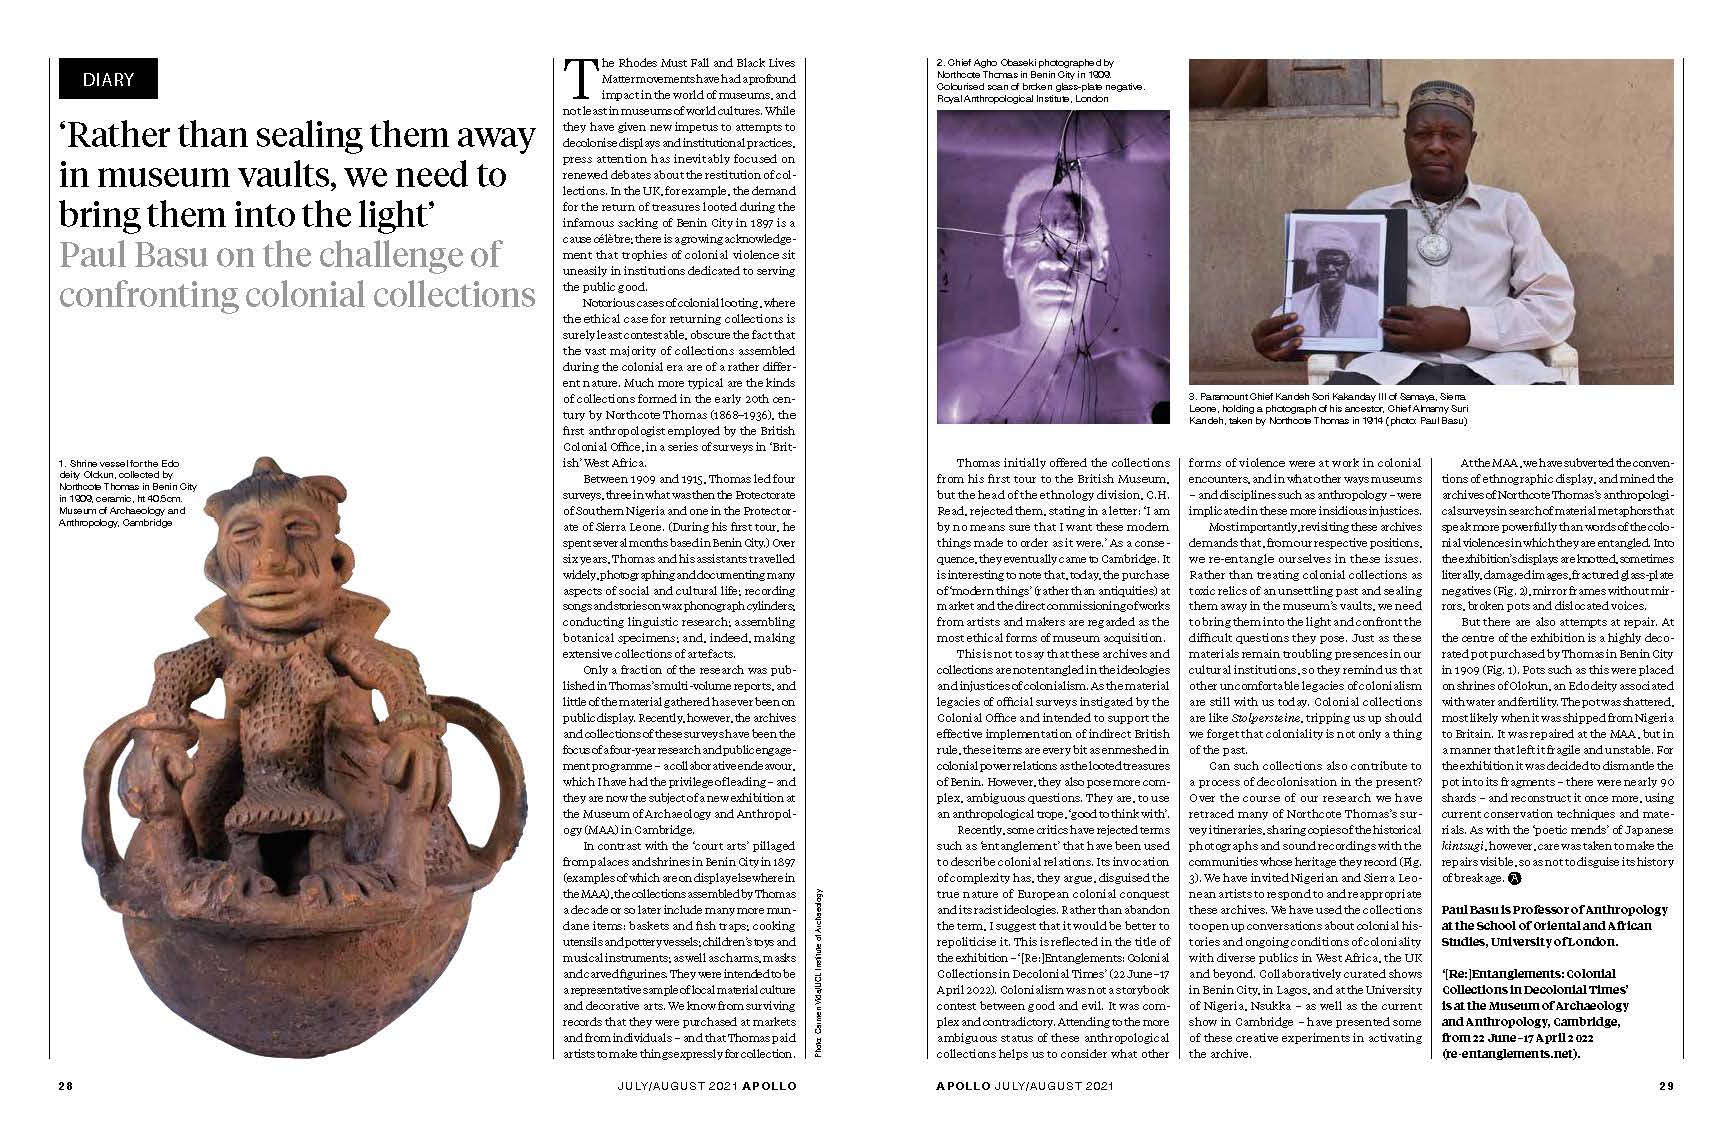 Screenshot of Apollo article. 'Rather than sealing them away in museum vaults, we need to bring them into the light', Paul Basu on the challenge of confronting colonial collections.